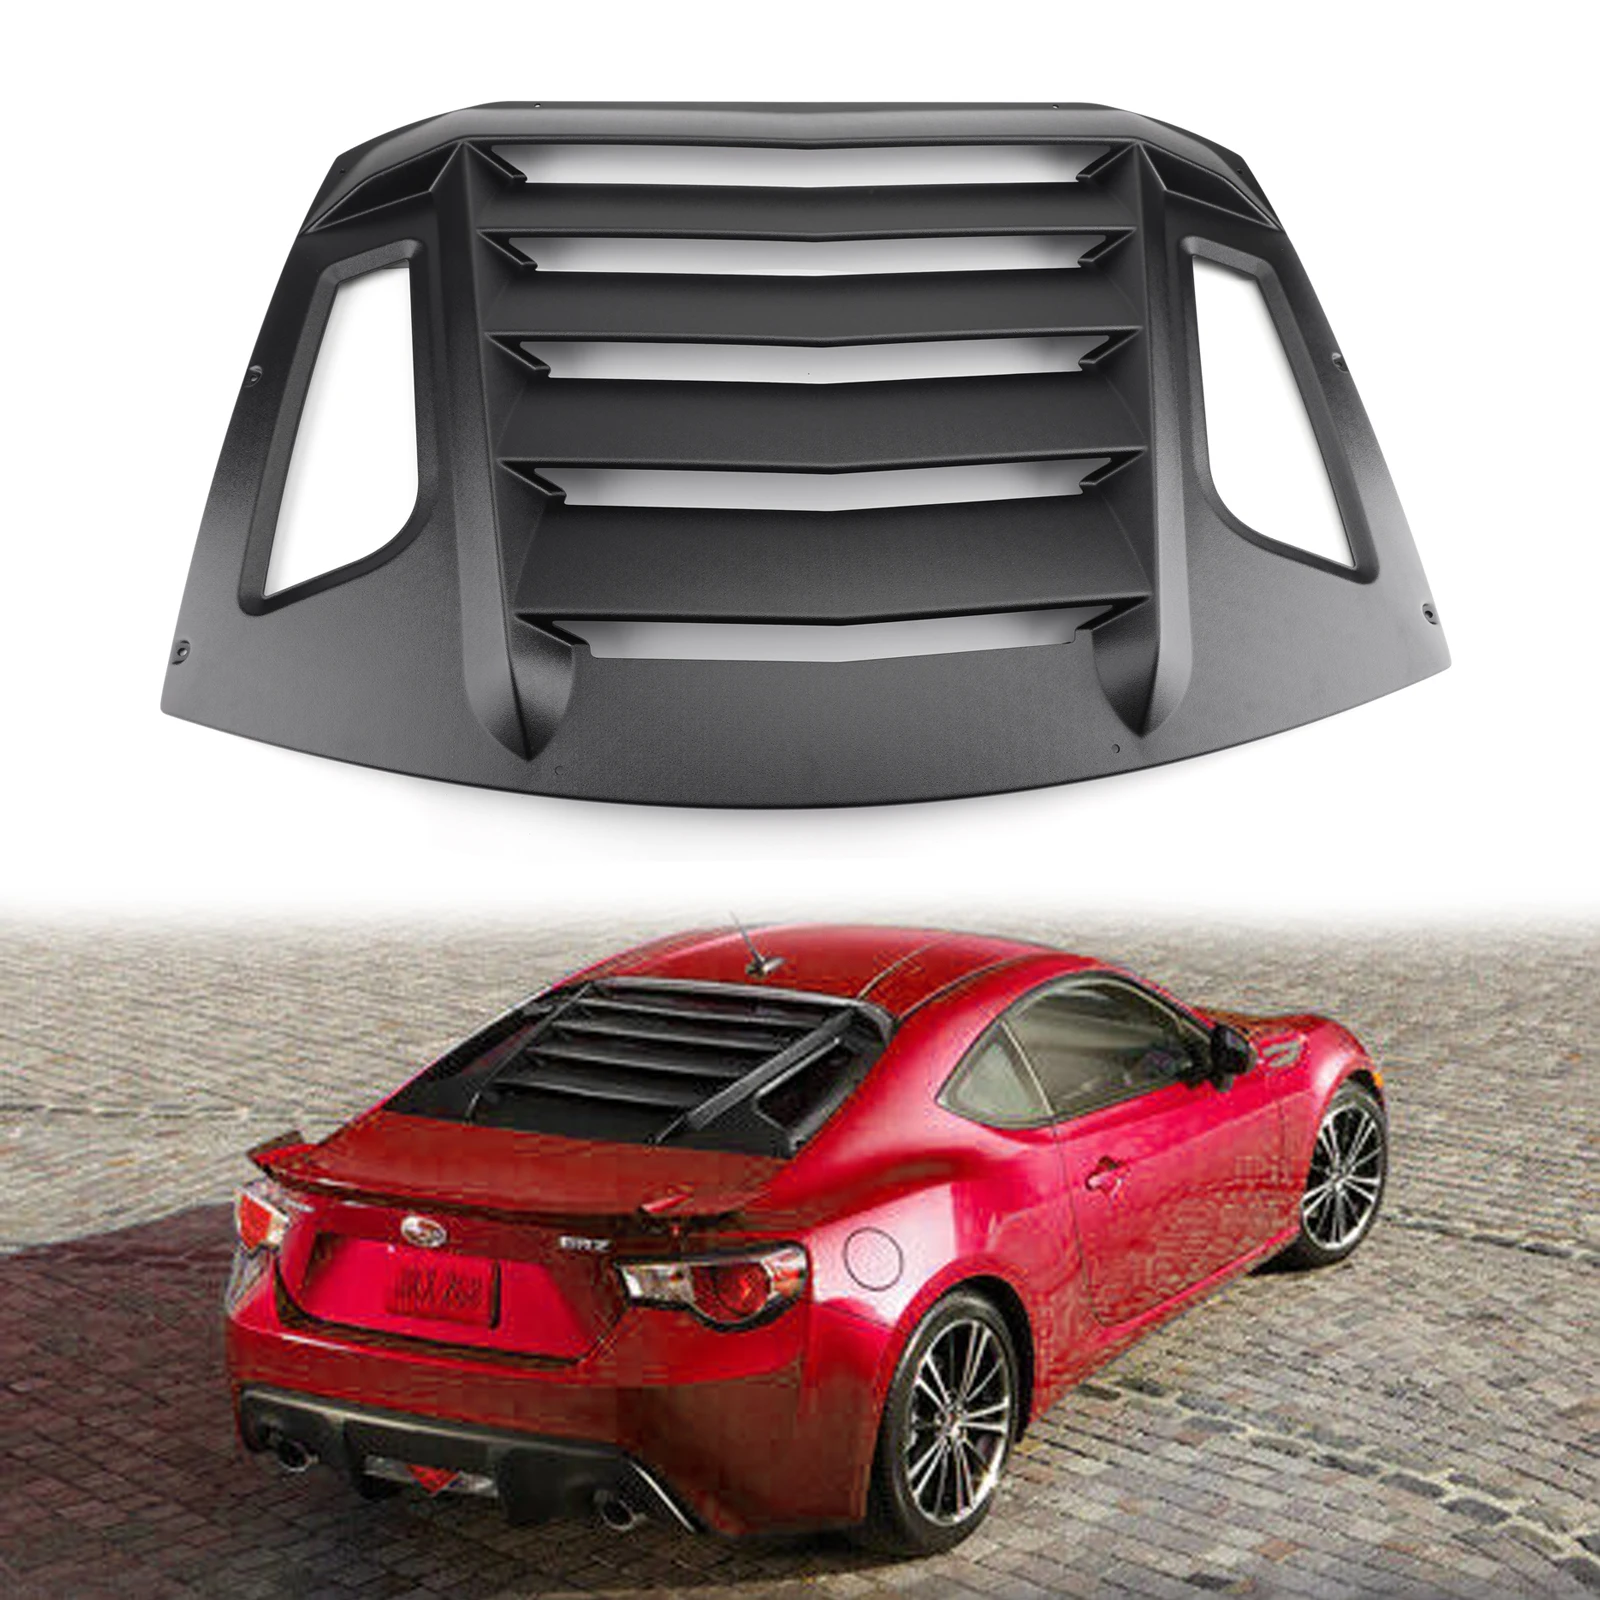 

Areyourshop Rear Window Louver Sun Shade Cover for 13 14 15 16 17 18 For Subaru BRZ Scion FR-S For Toyota GT86, Black